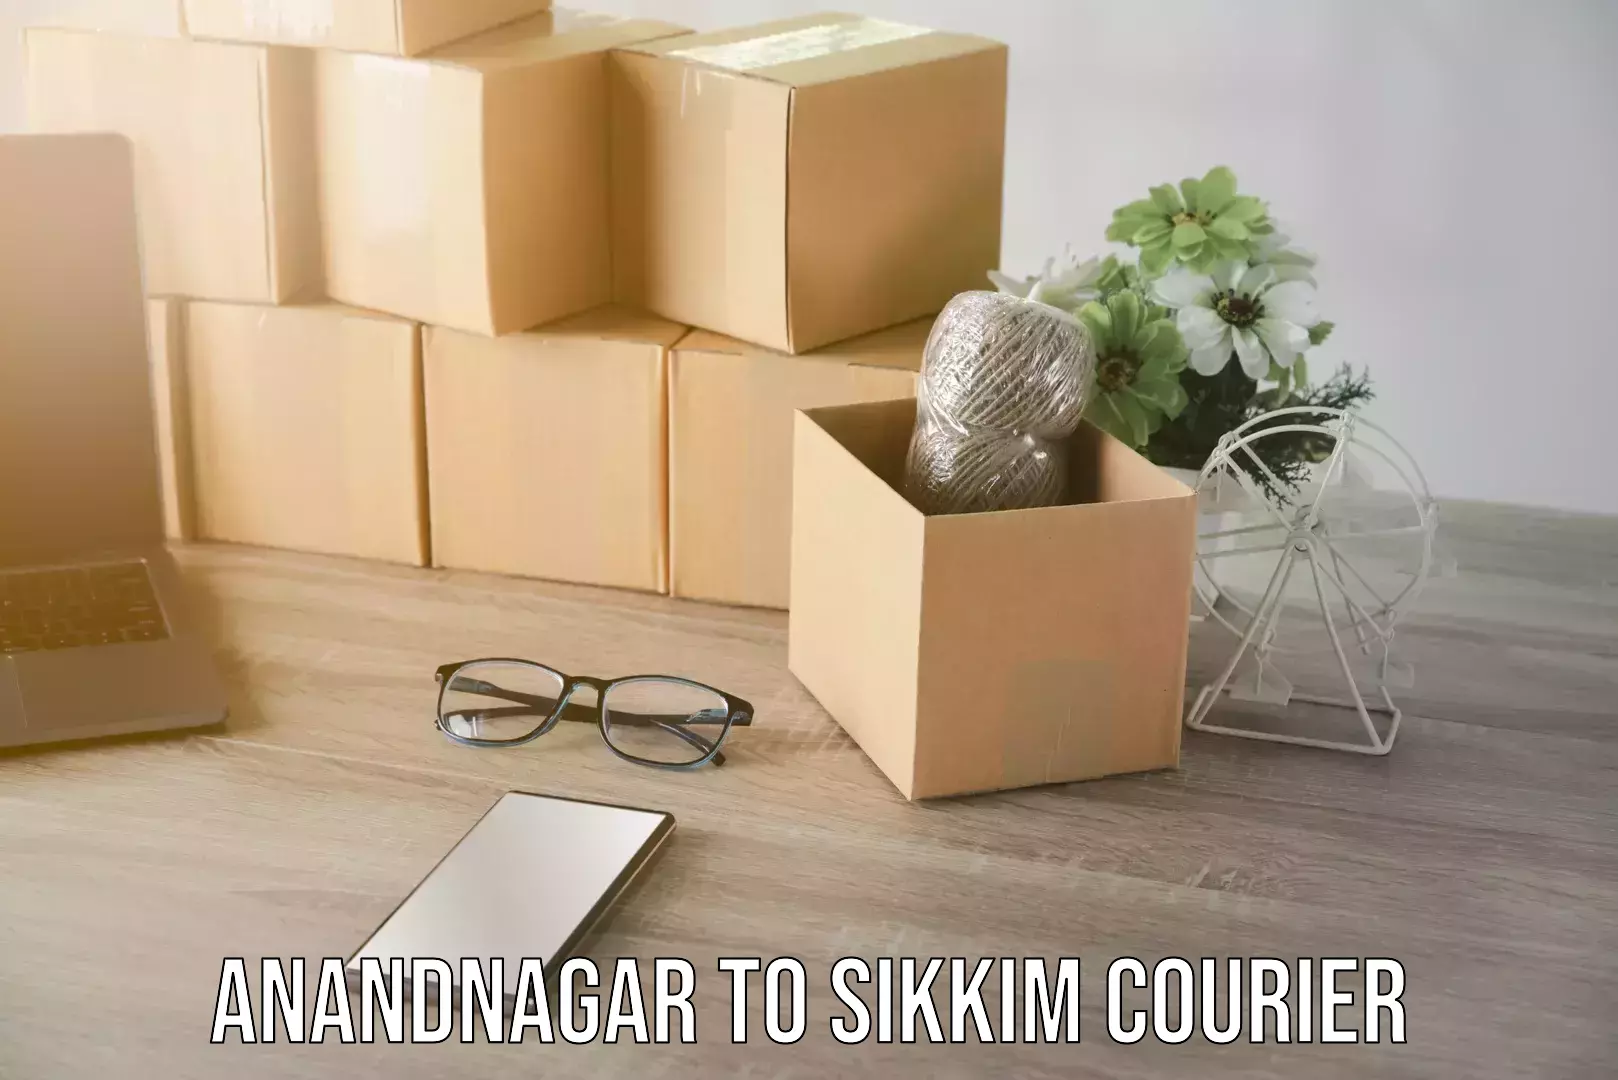 Delivery service partnership Anandnagar to Sikkim